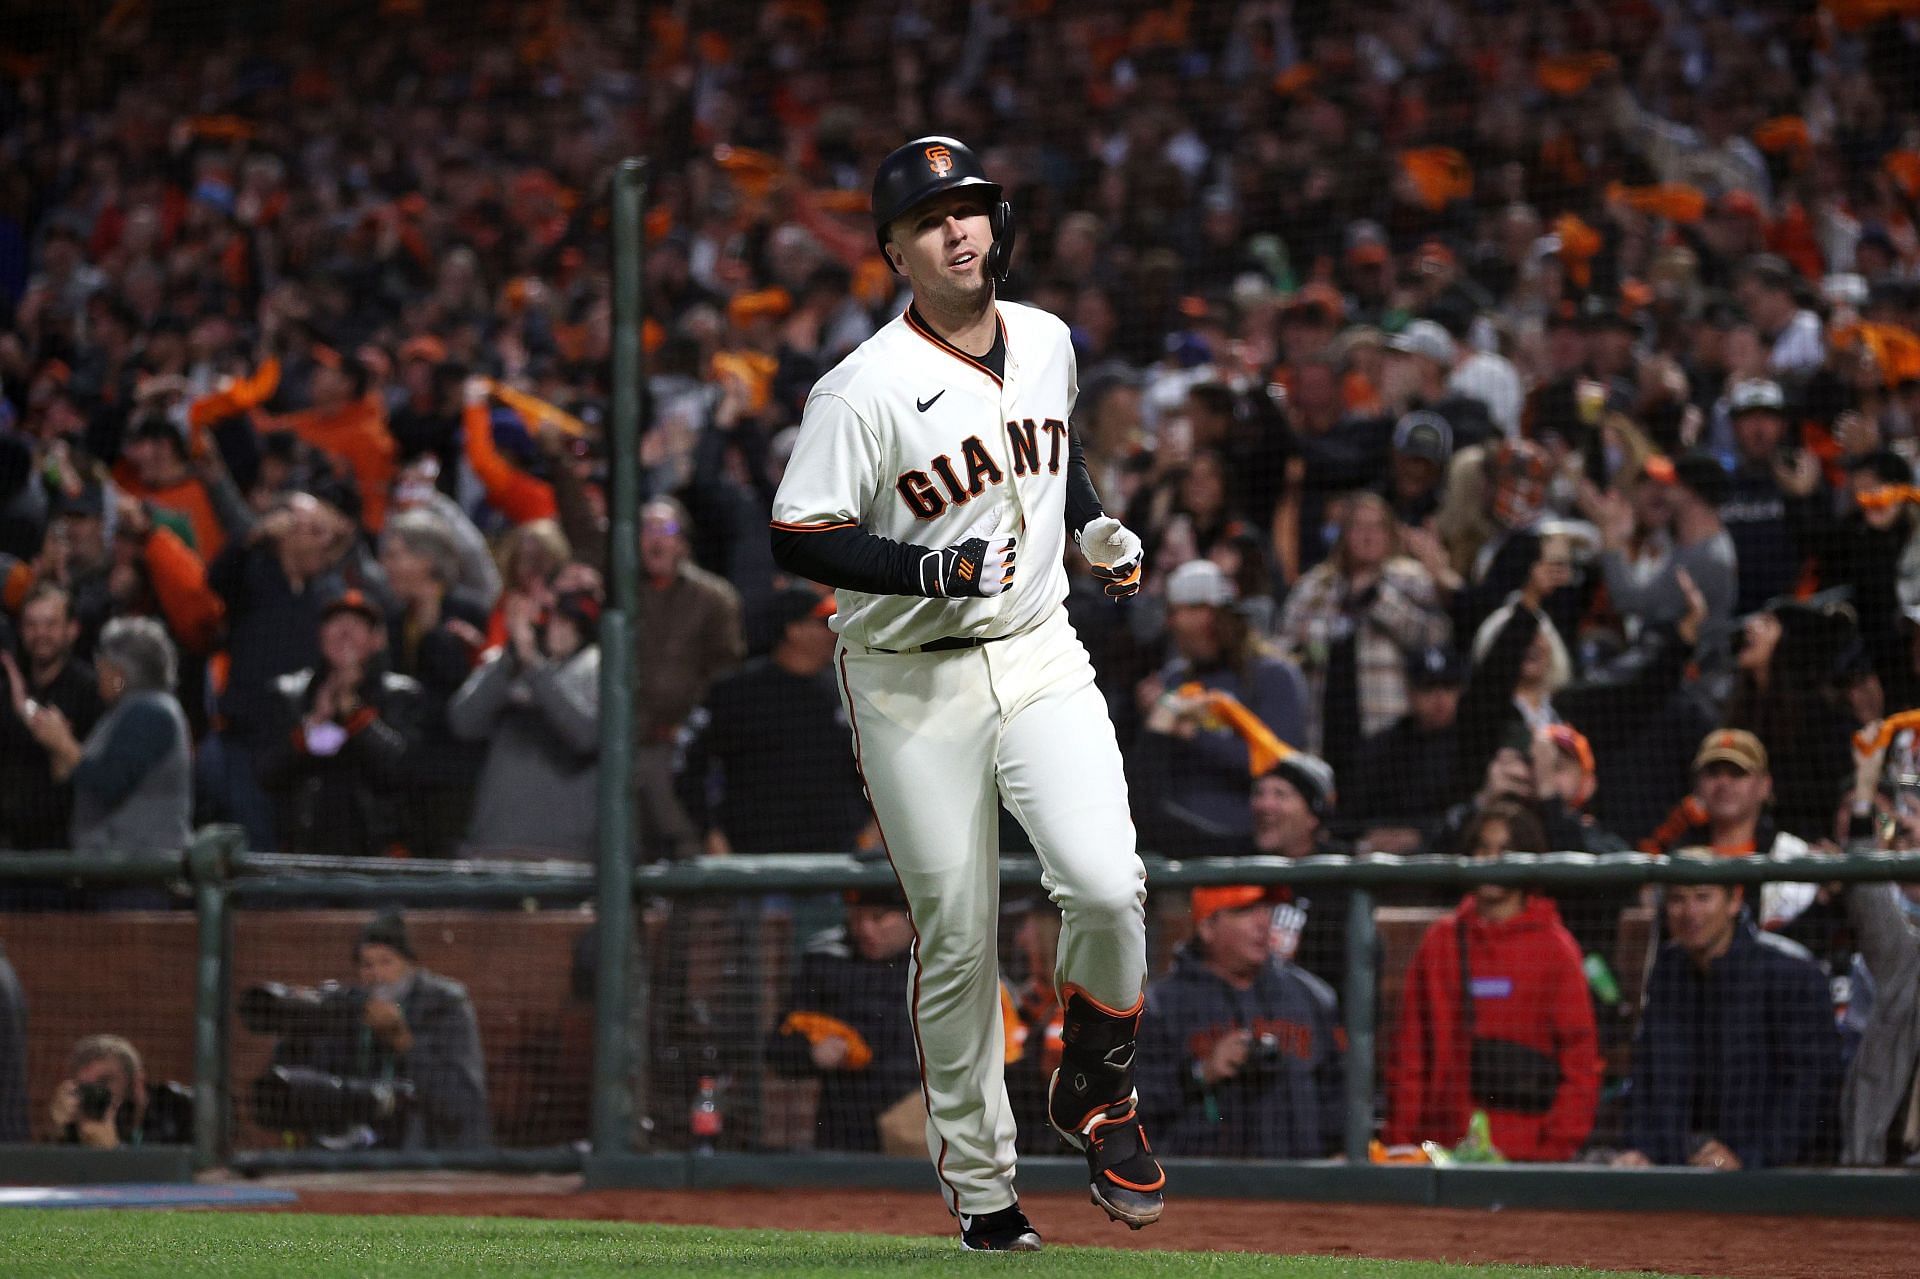 How many World Series Rings does Buster Posey have? Legendary